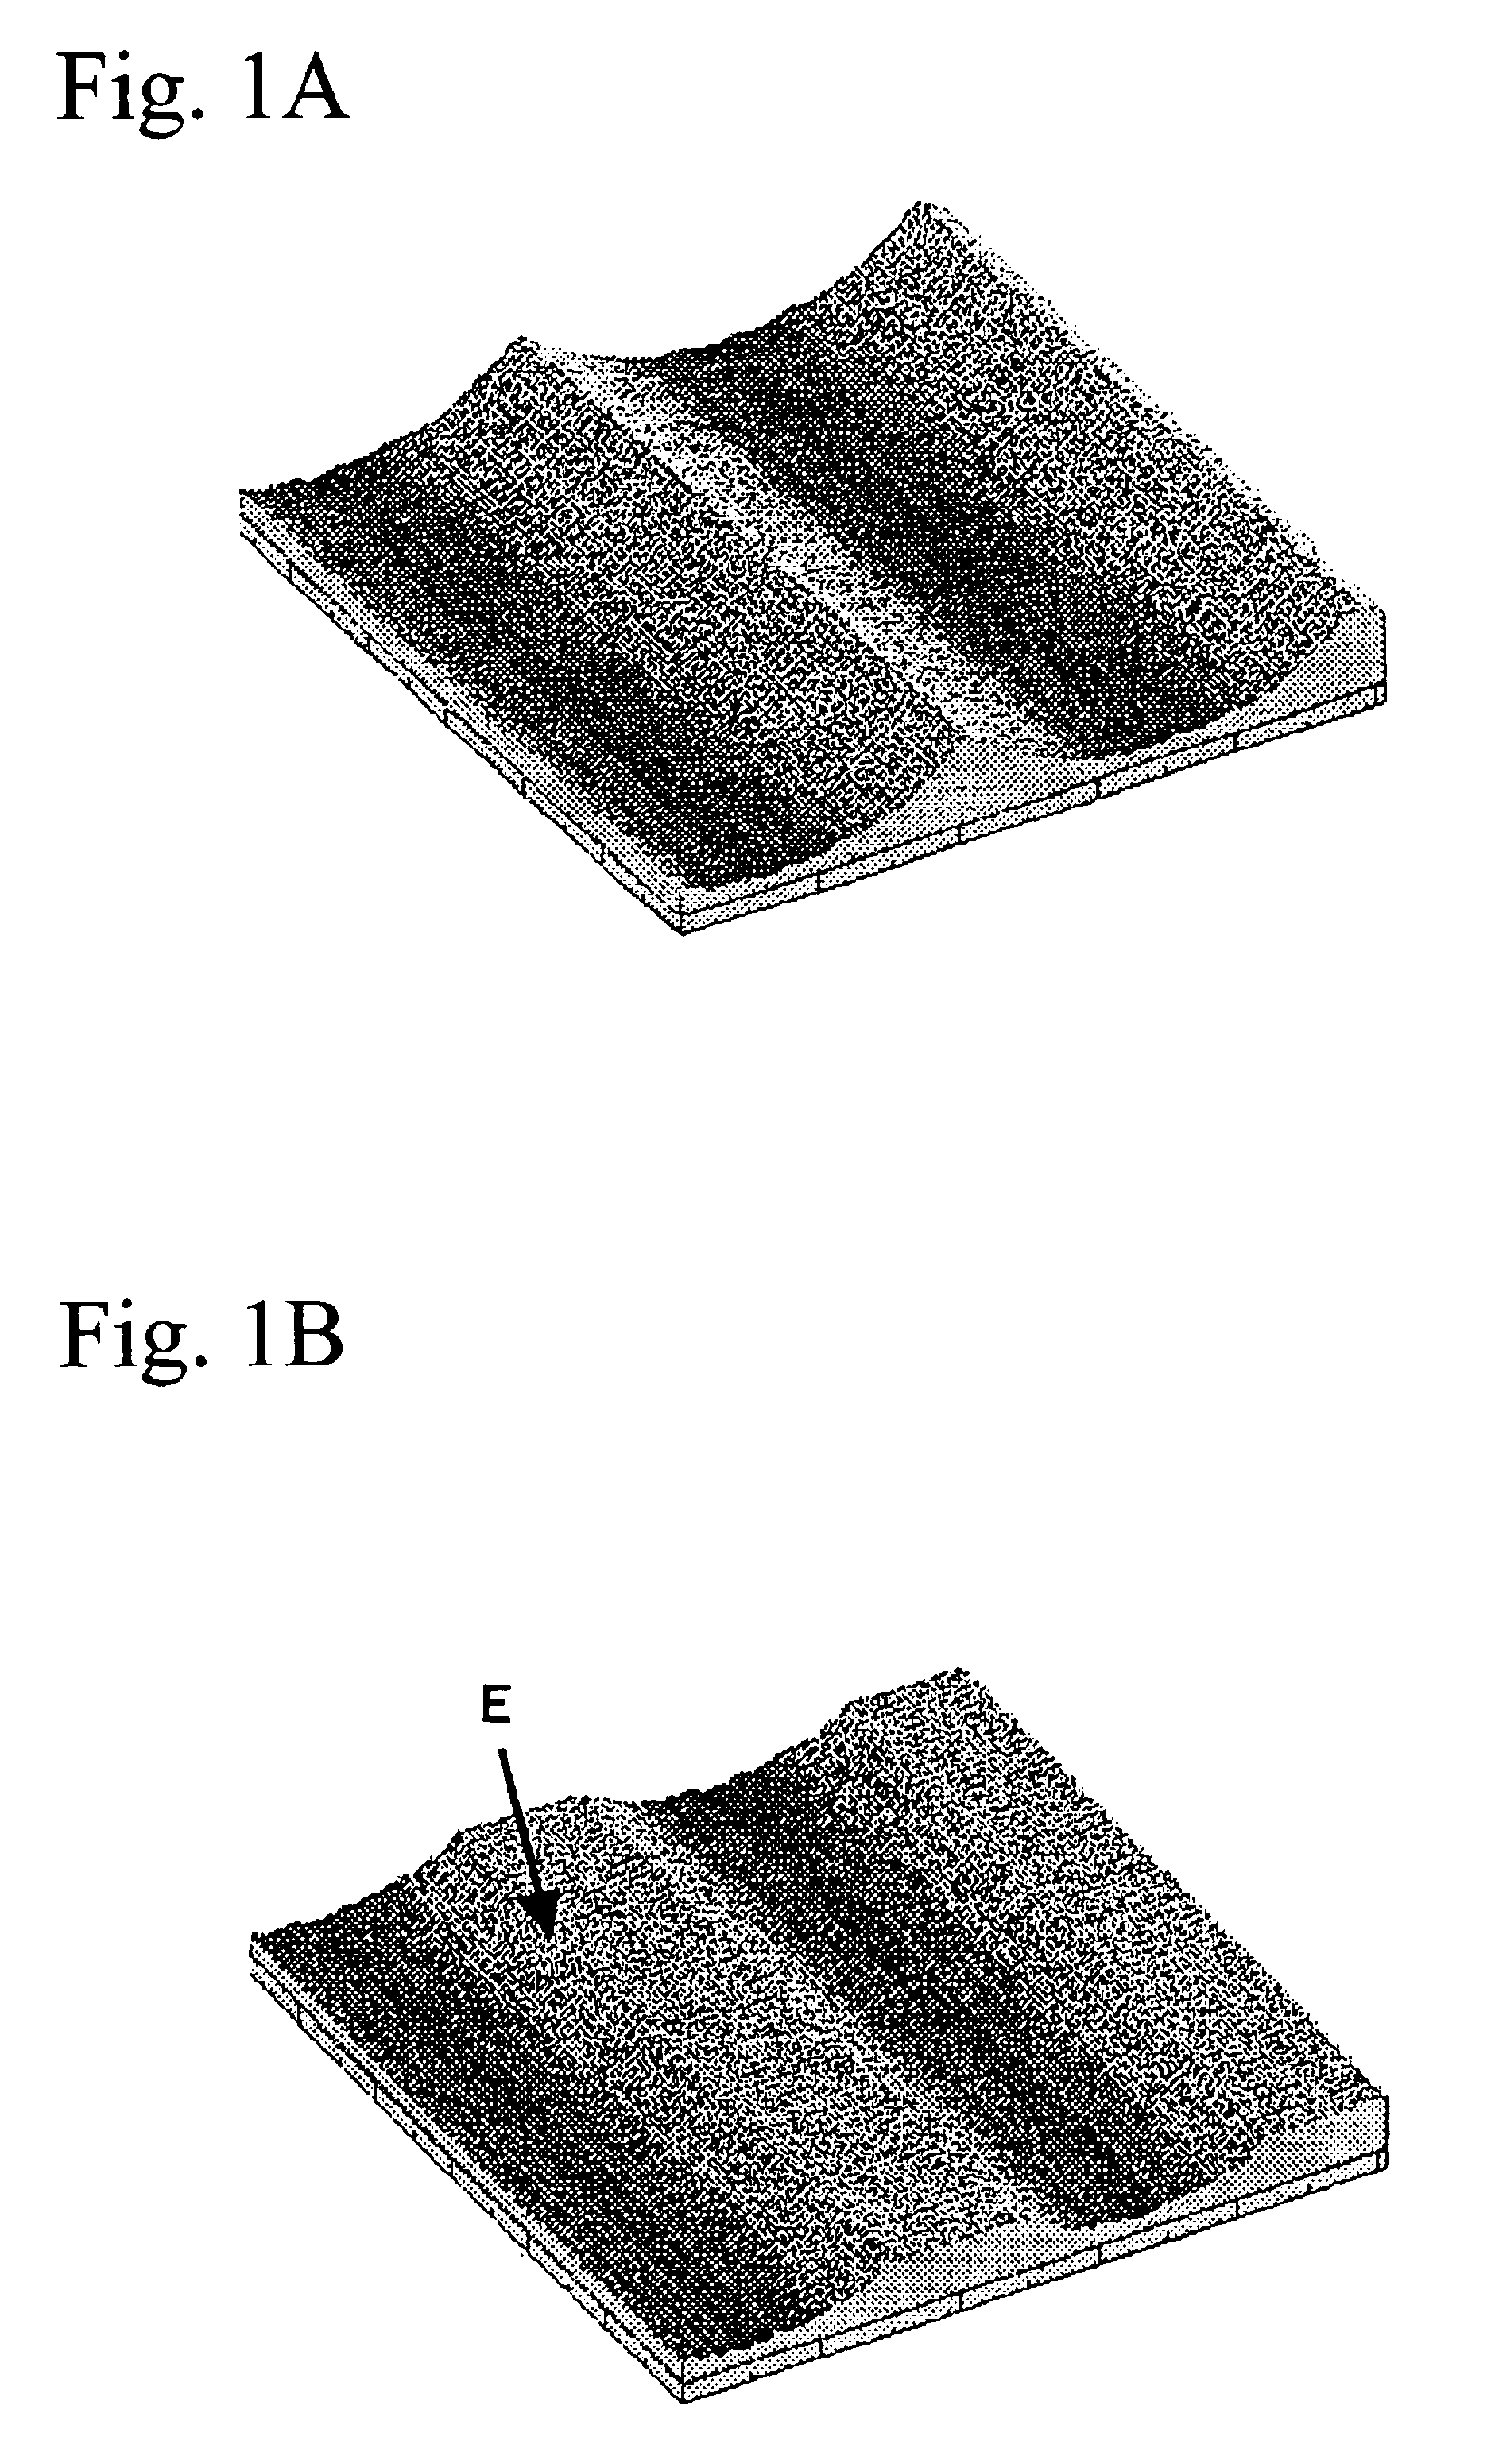 Metallic sliding member, piston for internal combustion engine, method of surface treating these, and apparatus therefor